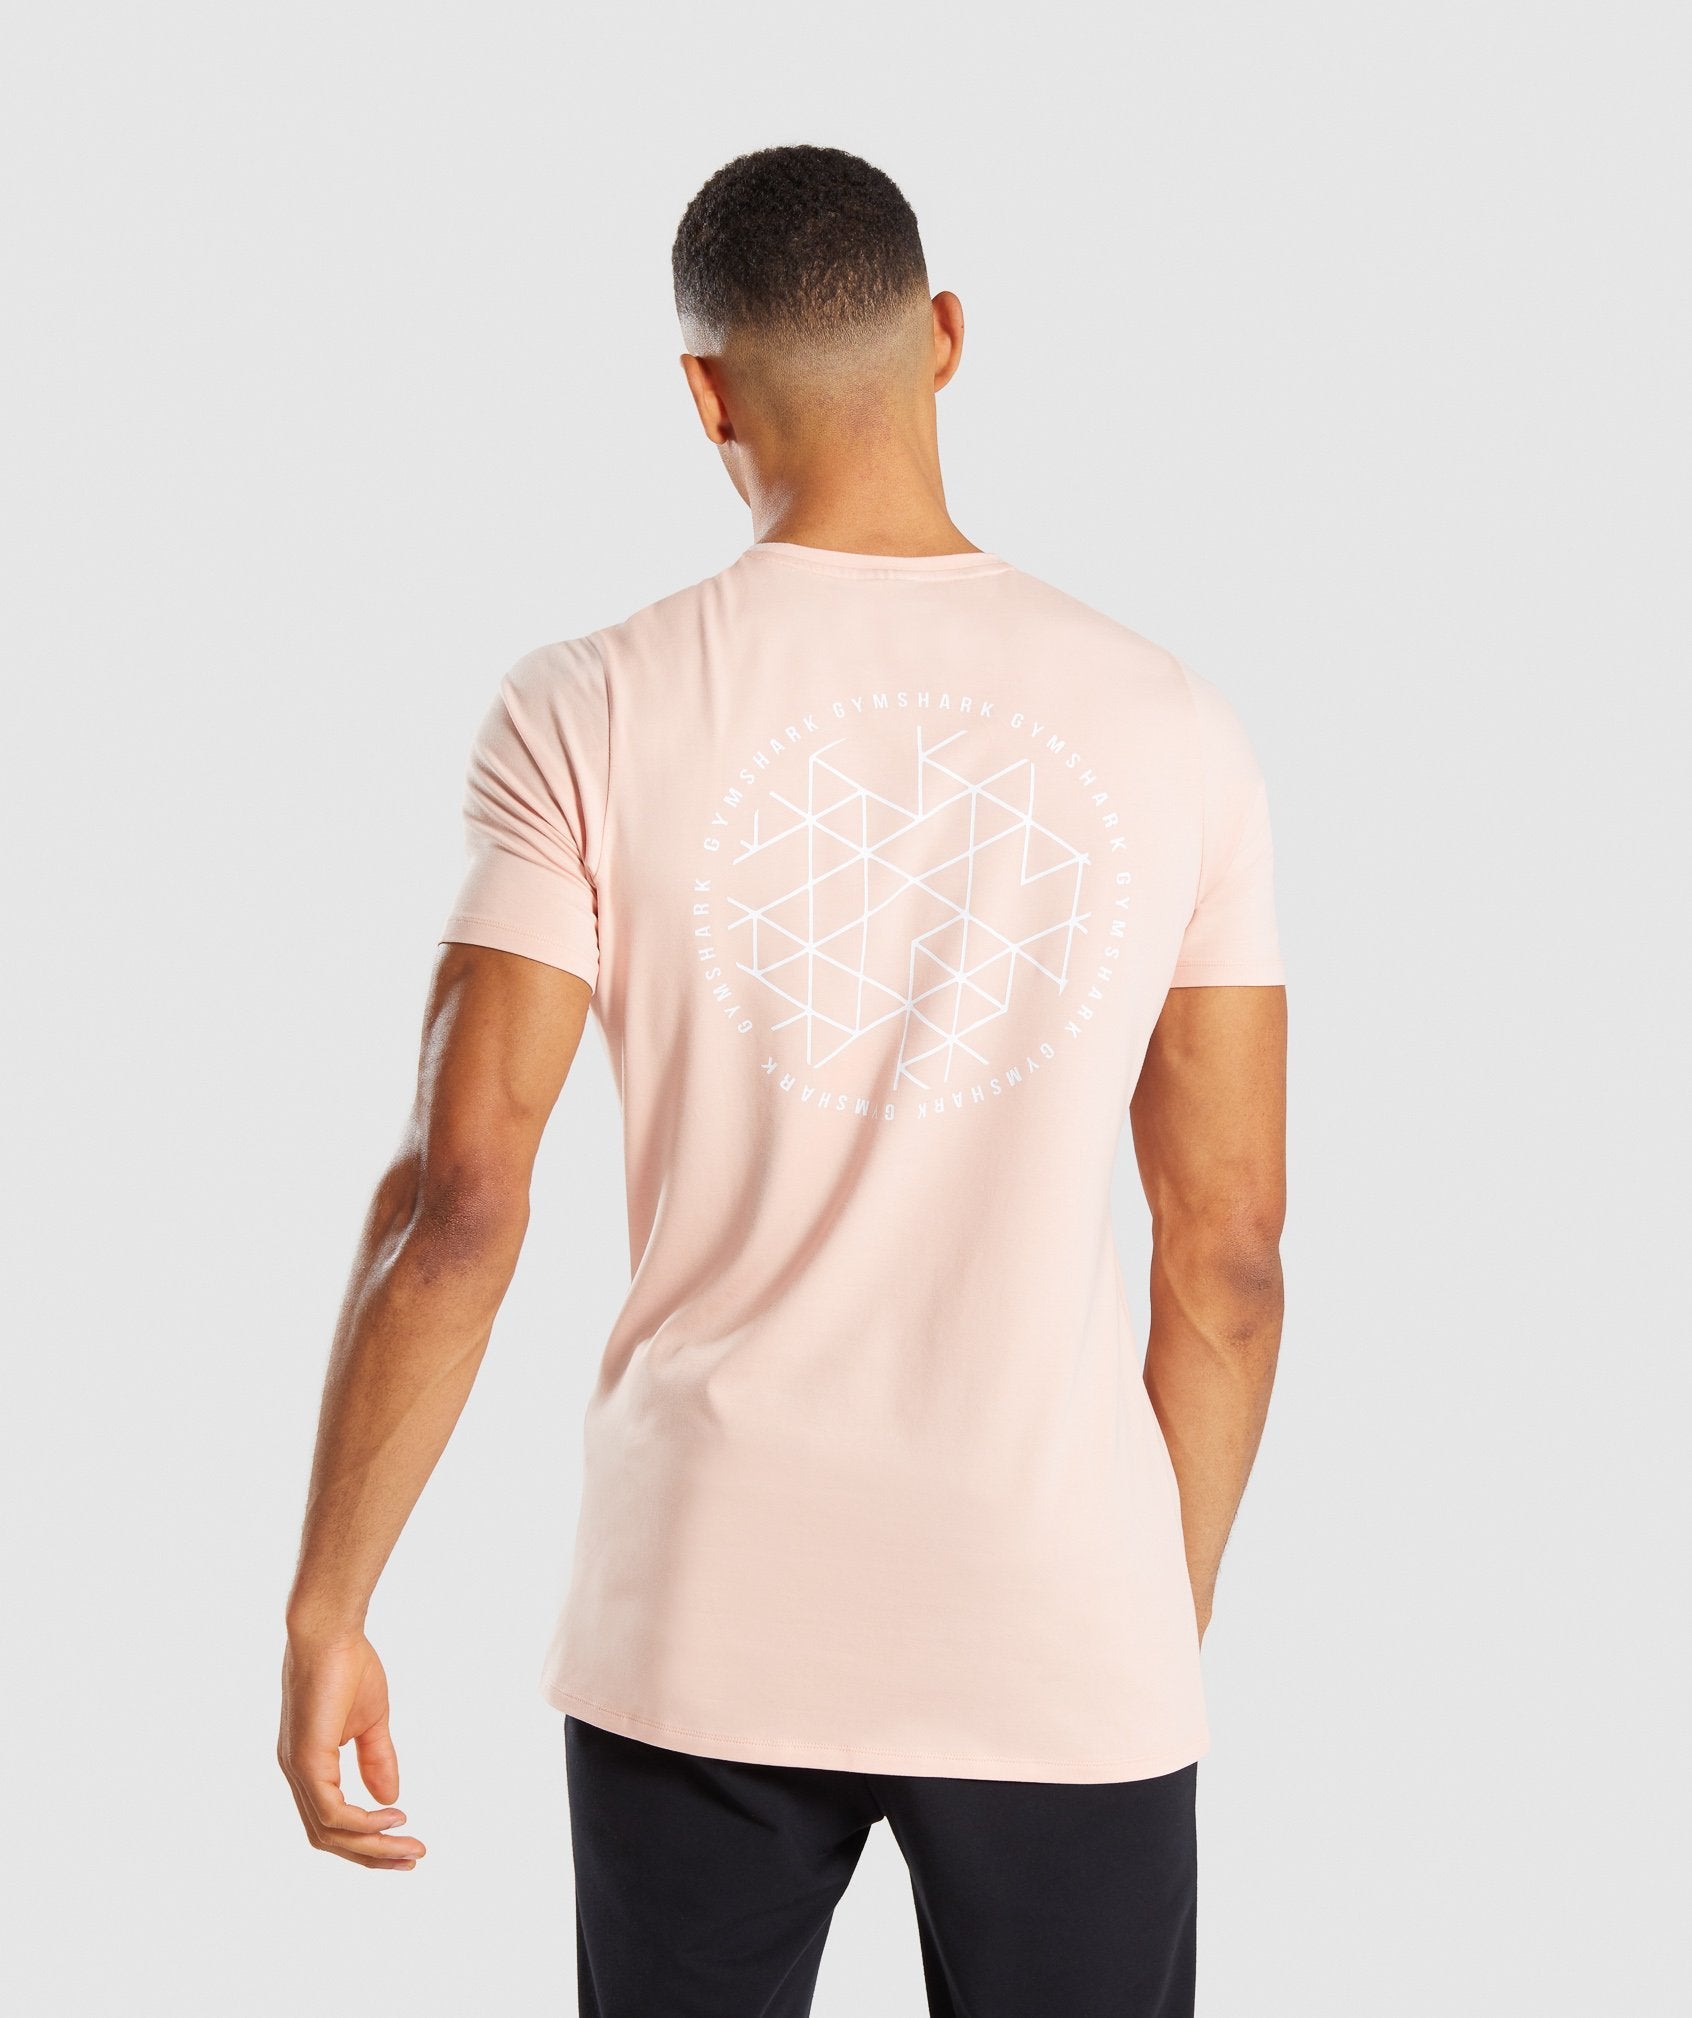 Geo T-Shirt in Blush Nude - view 2